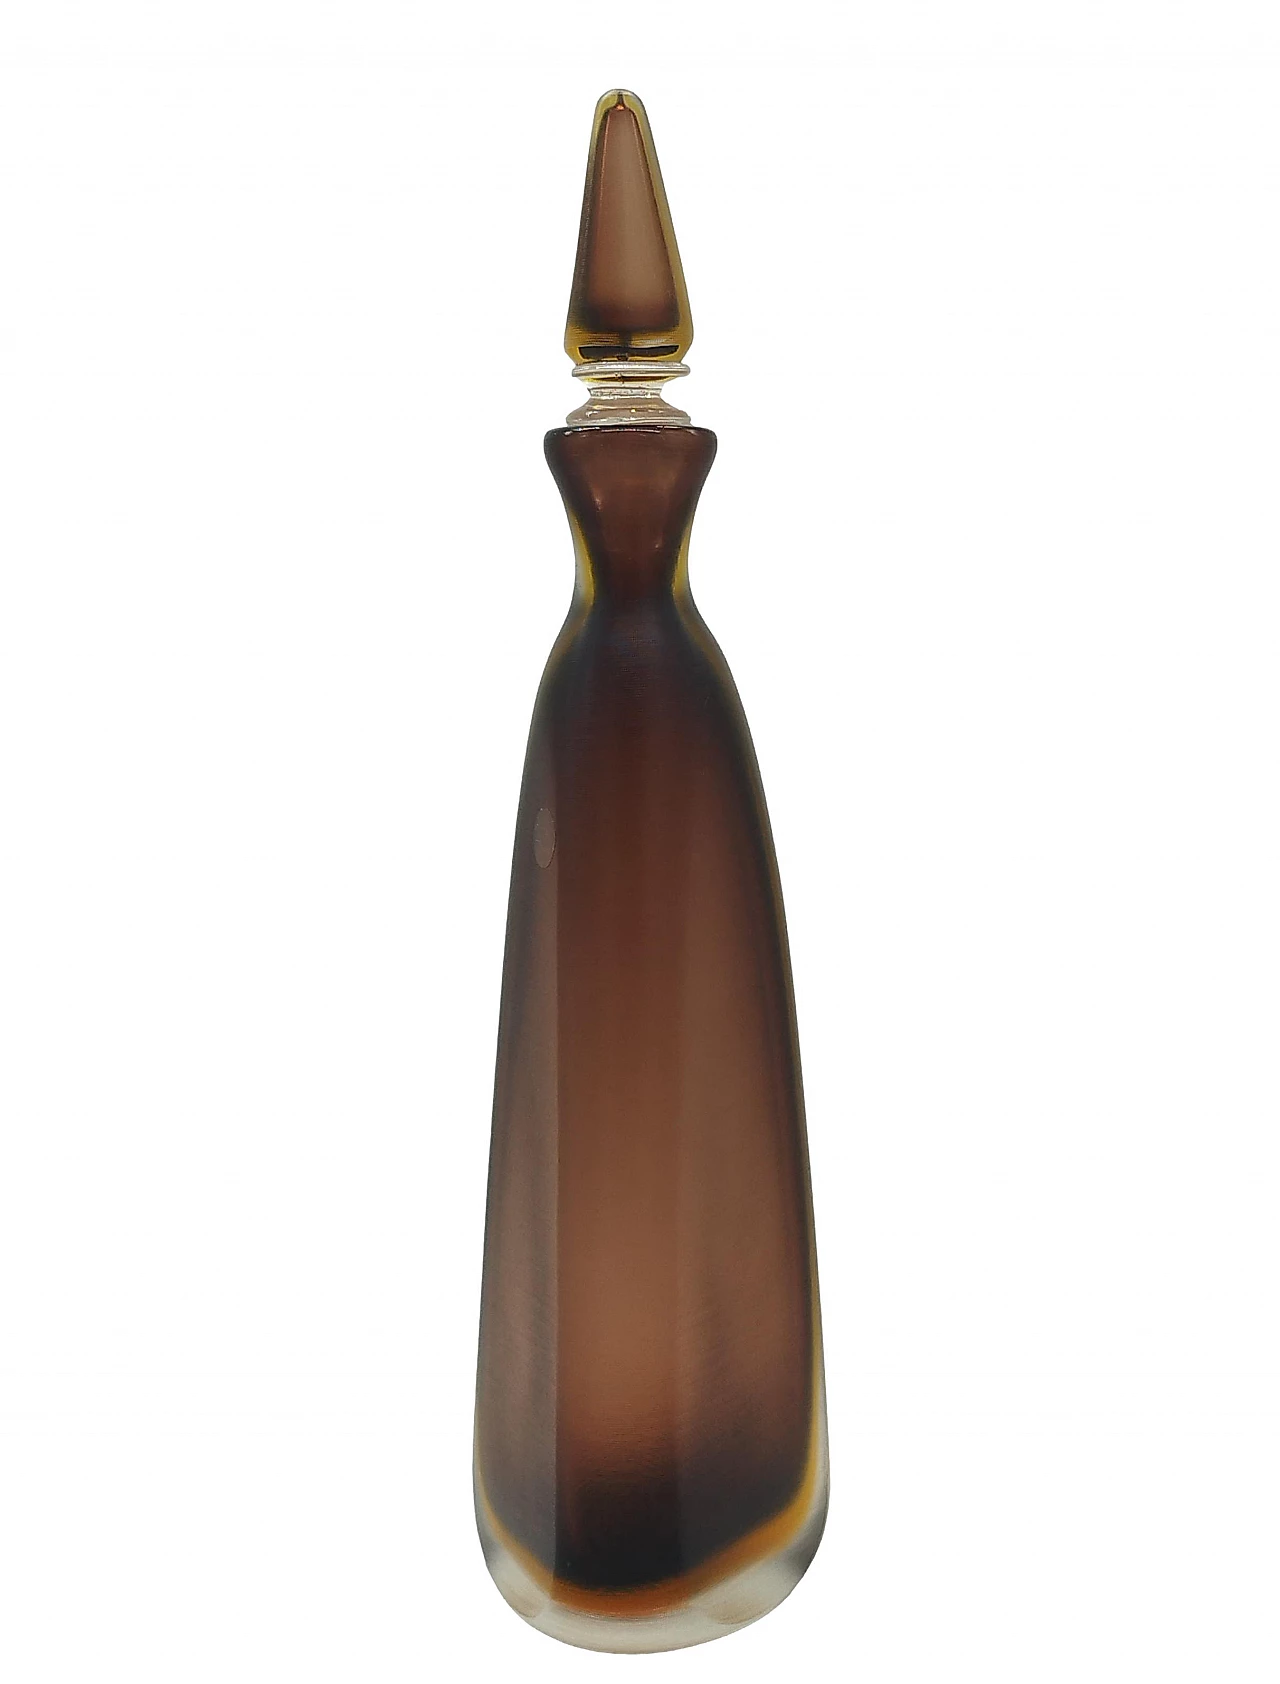 Murano glass bottle with stopper from the Bottiglie Incise series by Paolo Venini, 1985 2